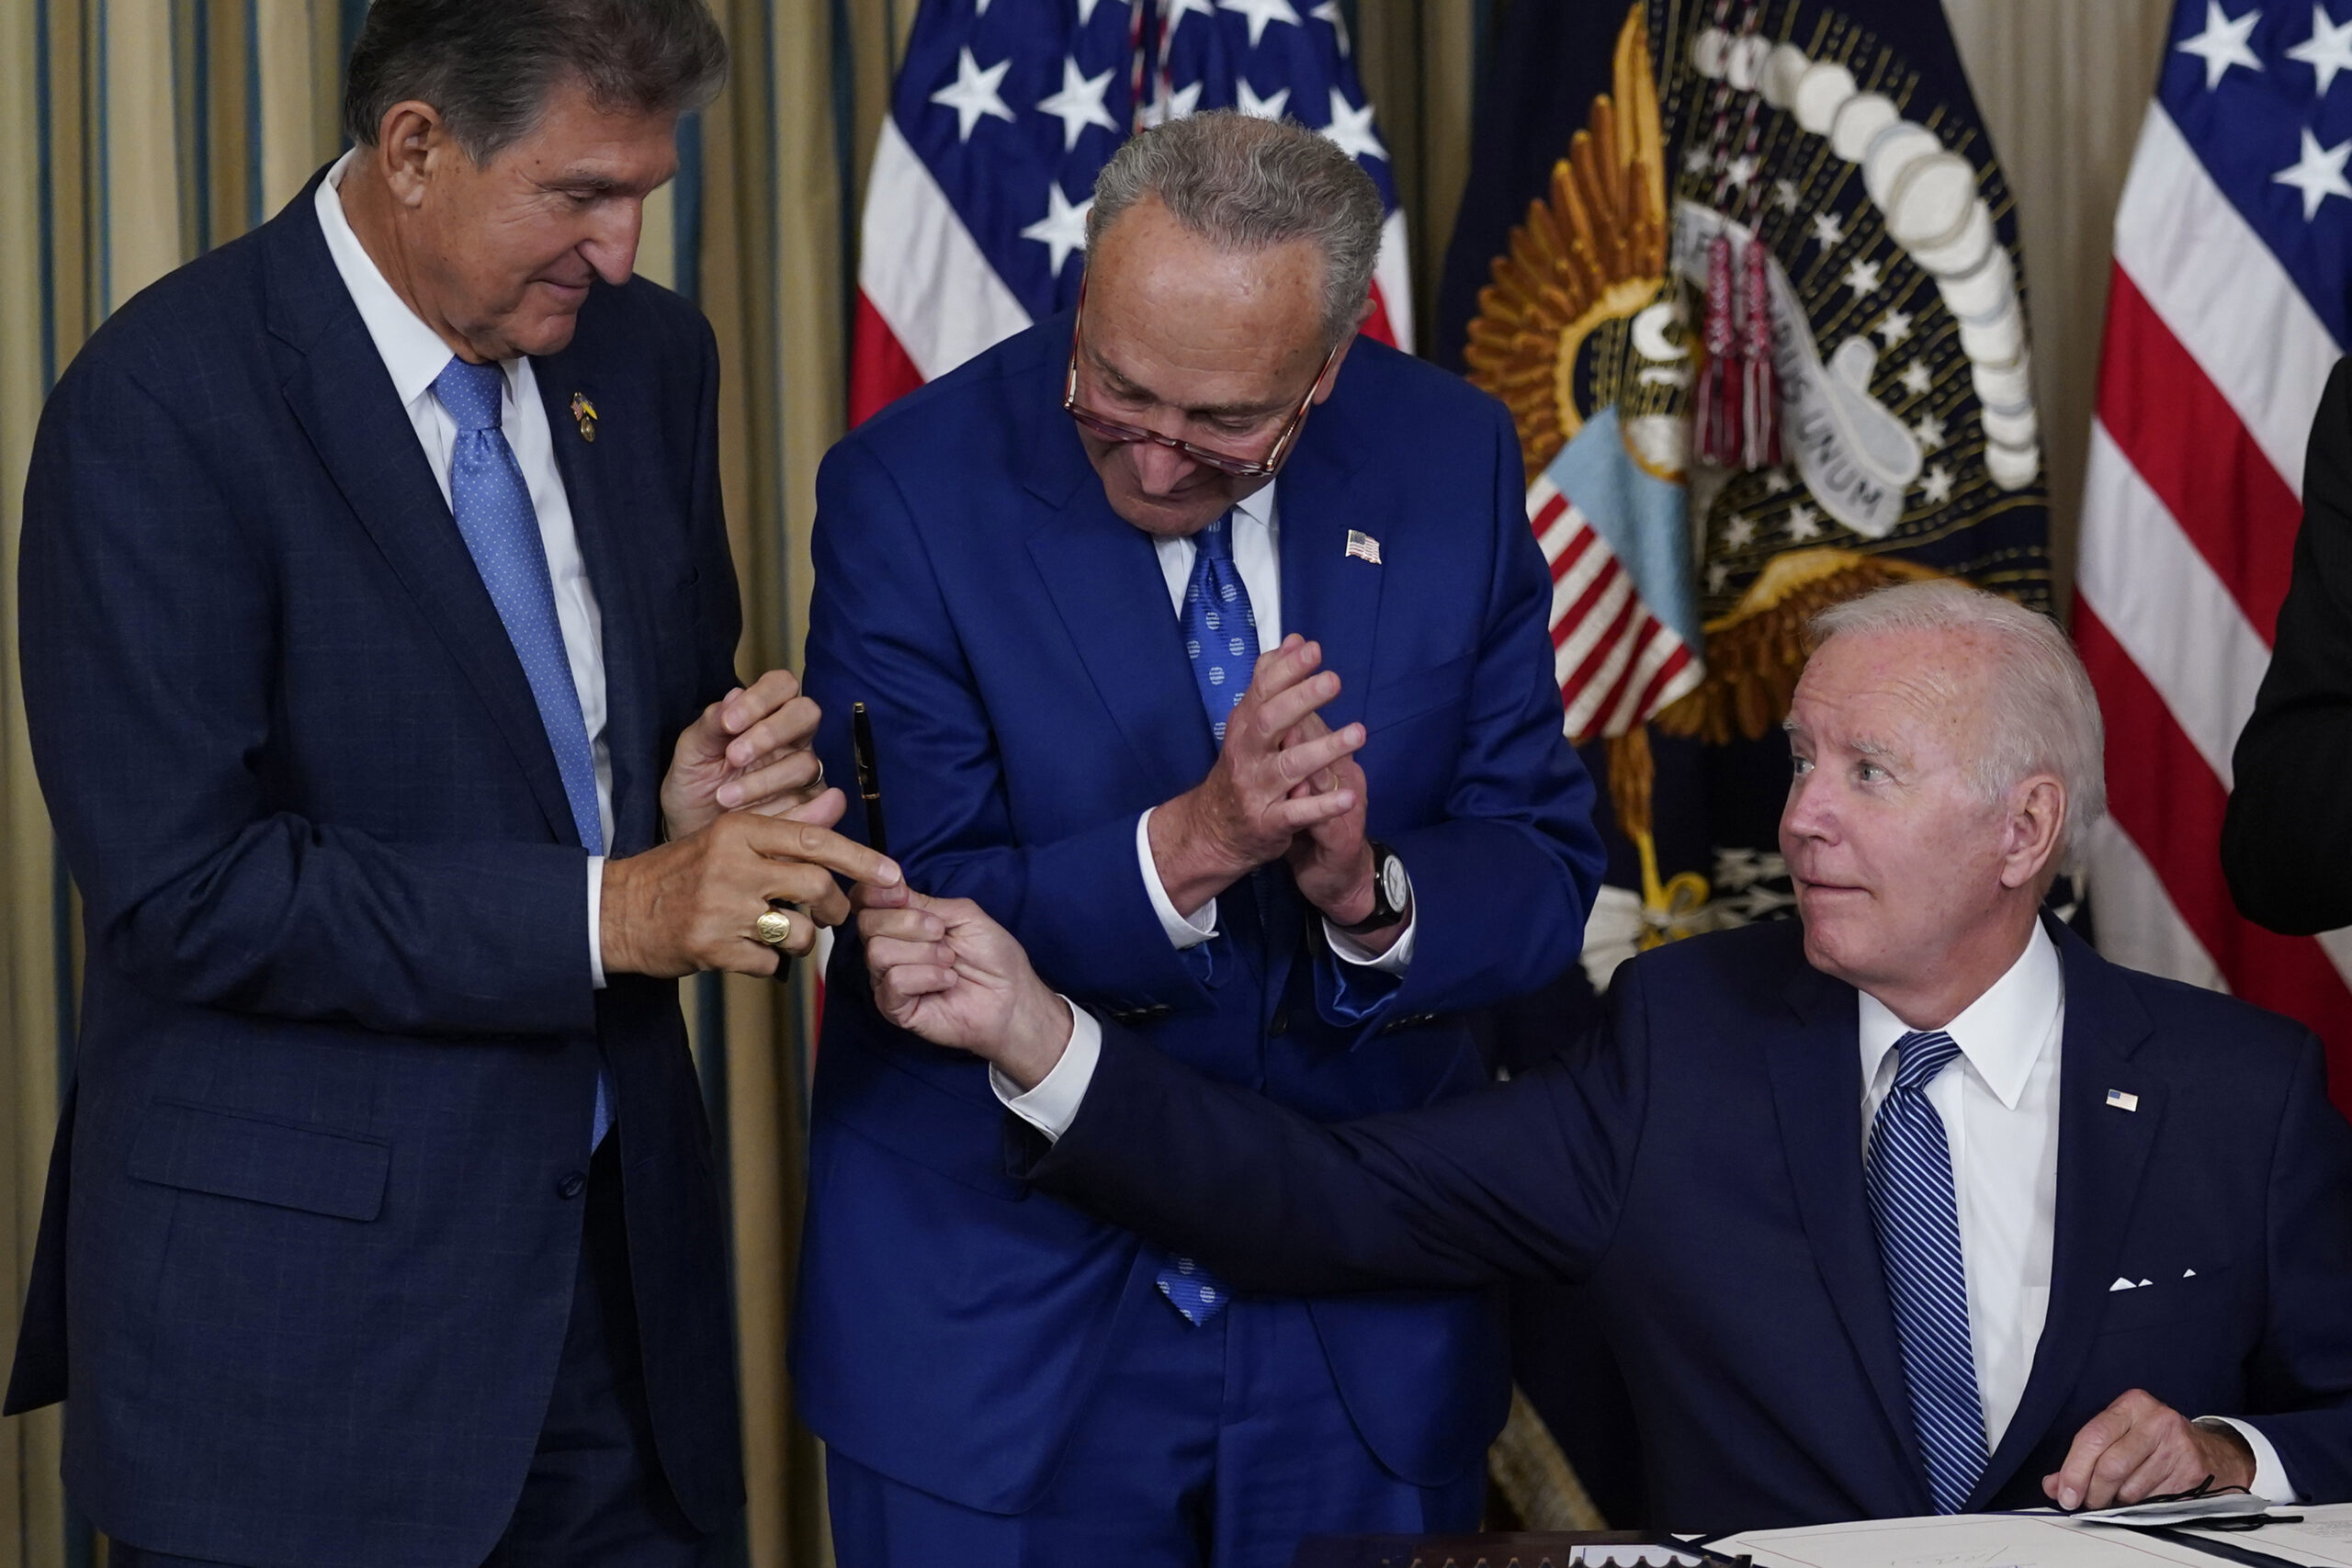 President Joe Biden hands the pen he used to sign the Democrats' landmark climate change and health care bill to Sen. Joe Manchin, D-W.Va., as Senate Majority Leader Chuck Schumer of N.Y., watches in the State Dining Room of the White House in Washington, Tuesday, Aug. 16, 2022. (AP Photo/Susan Walsh)